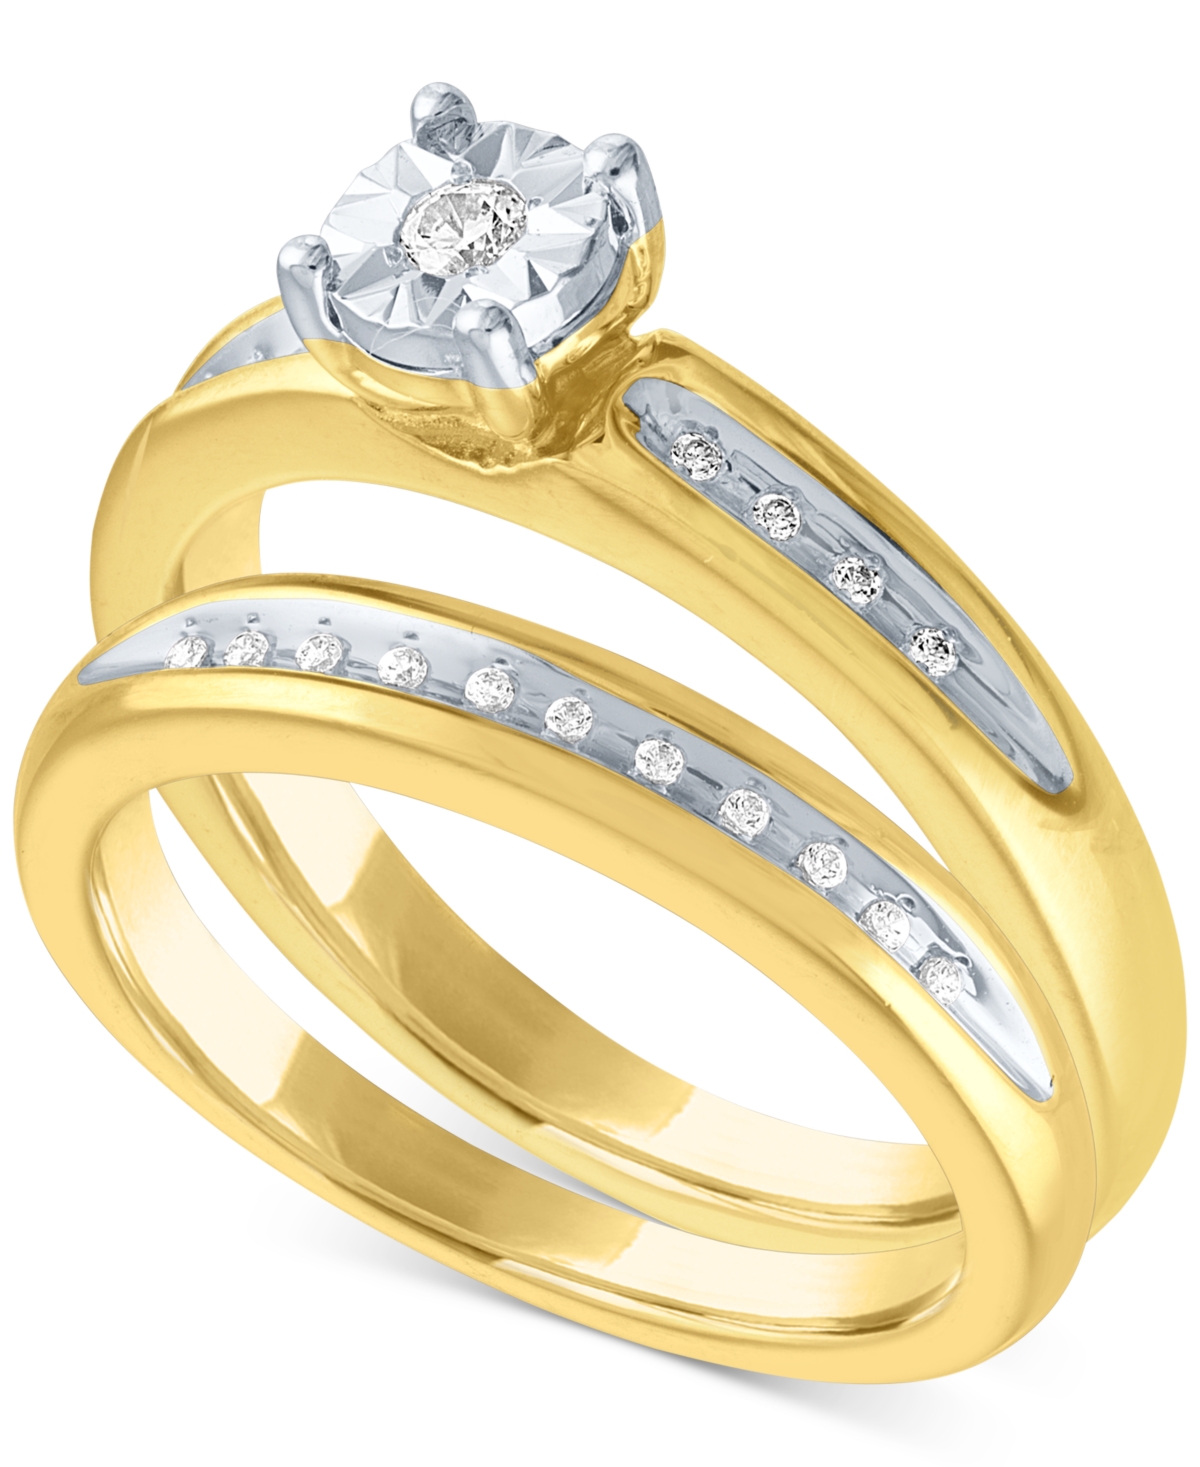 Diamond Bridal Set (1/10 ct. t.w.) in 14k Gold Over Sterling Silver - Yellow Gold/Silver